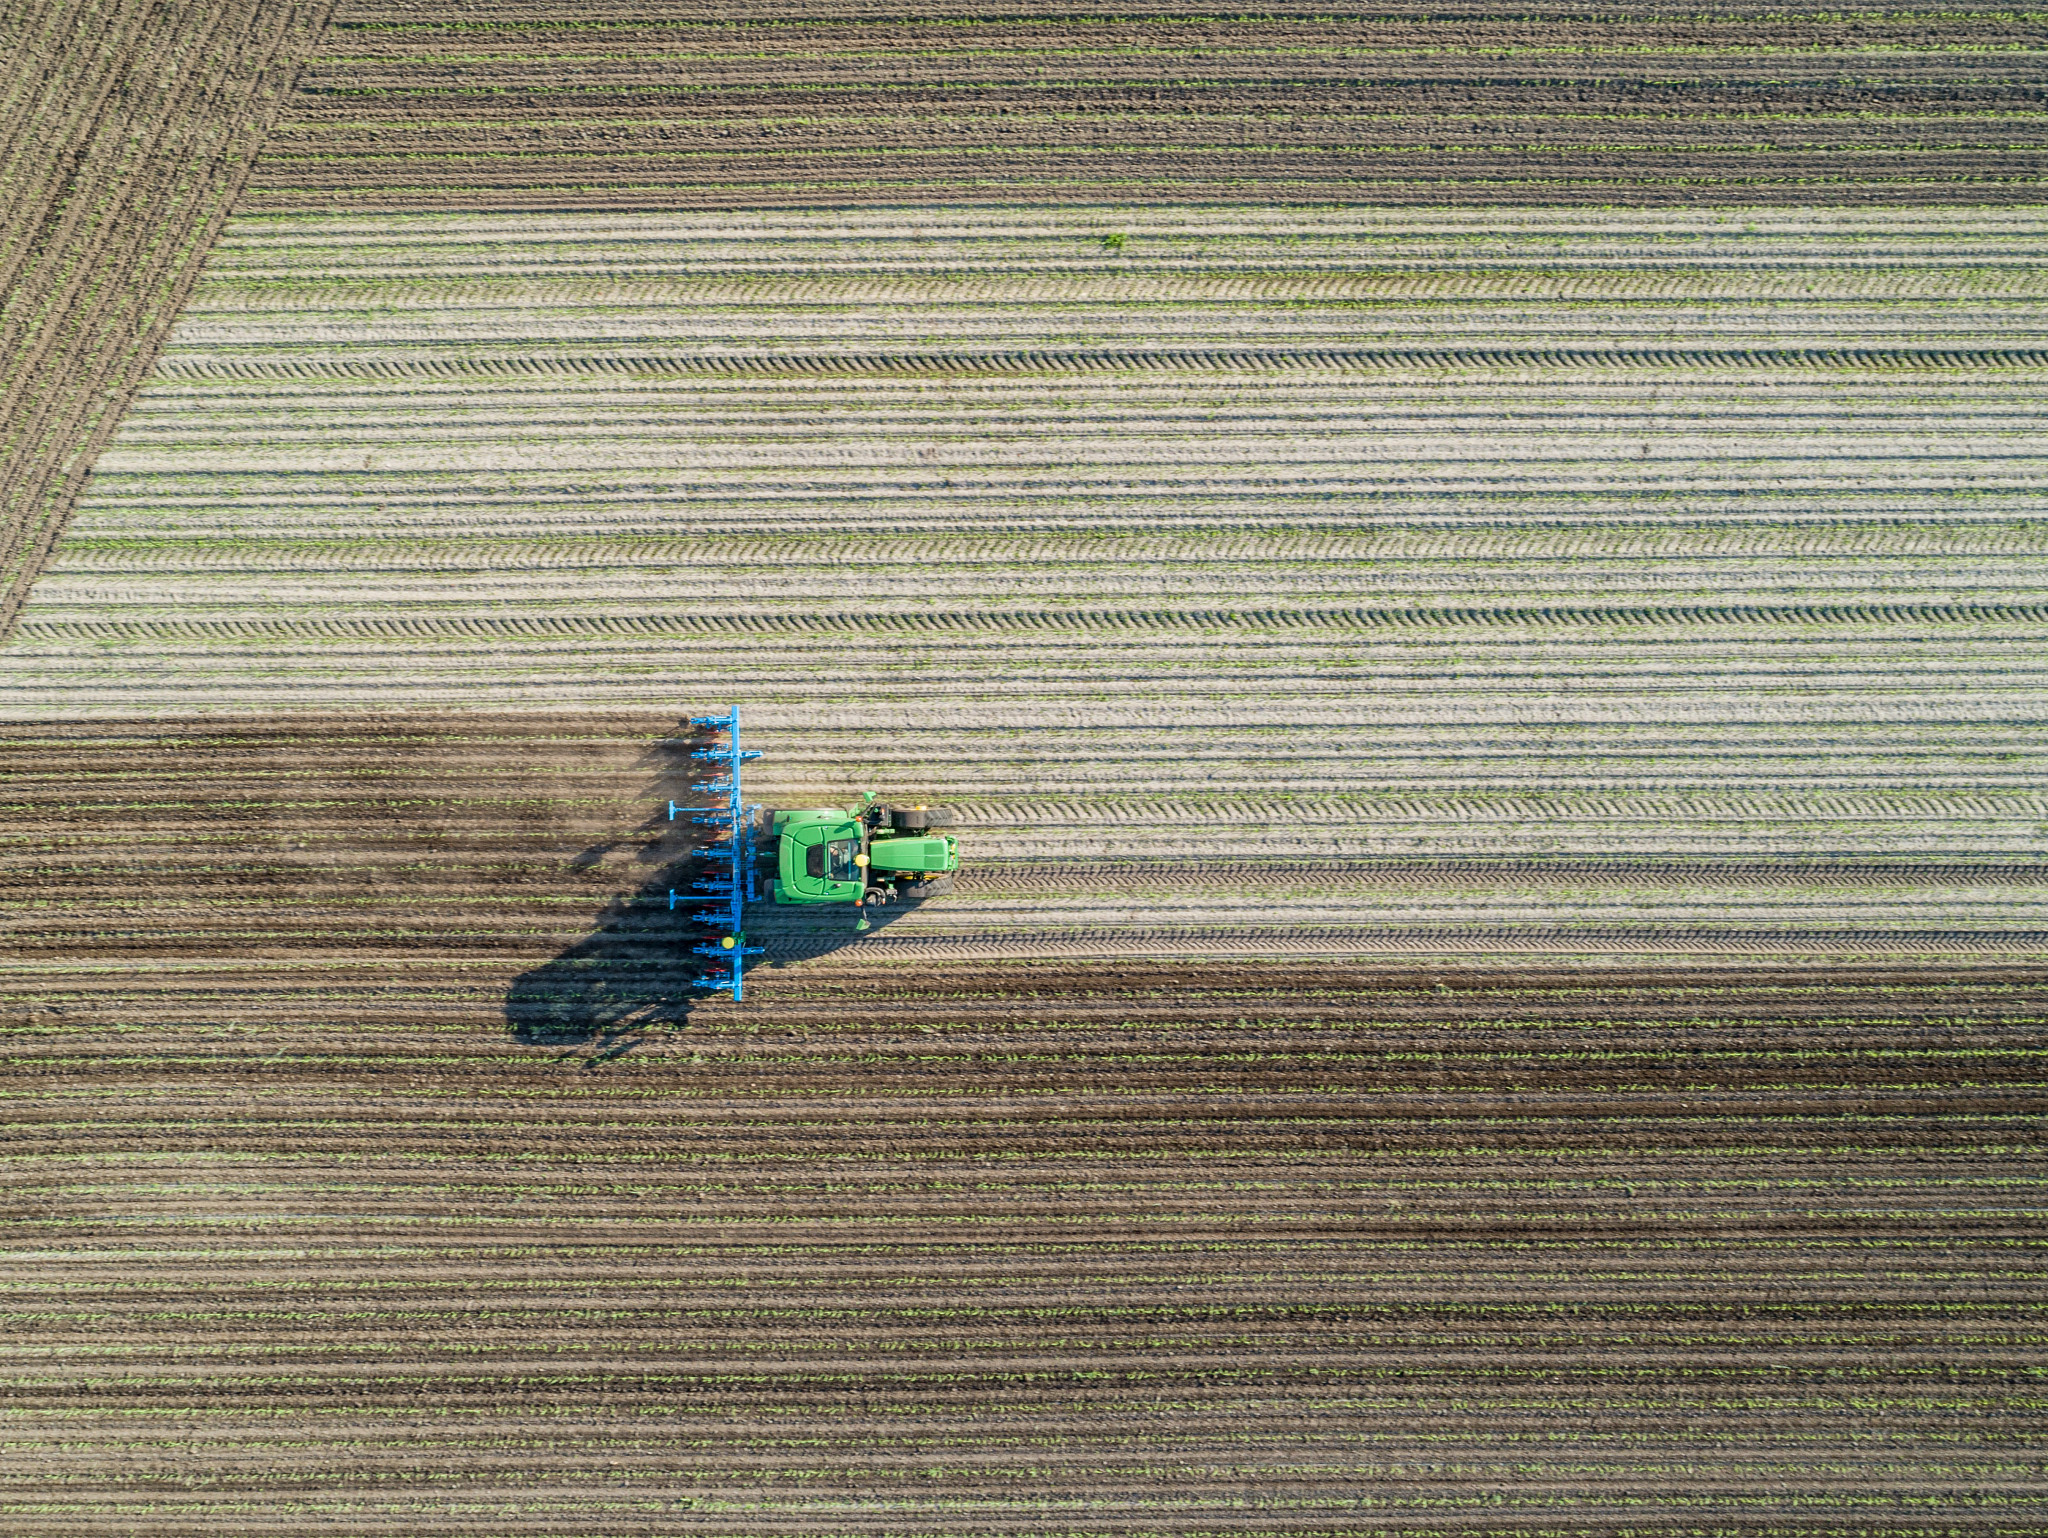 Overhead view of a cultivator in action